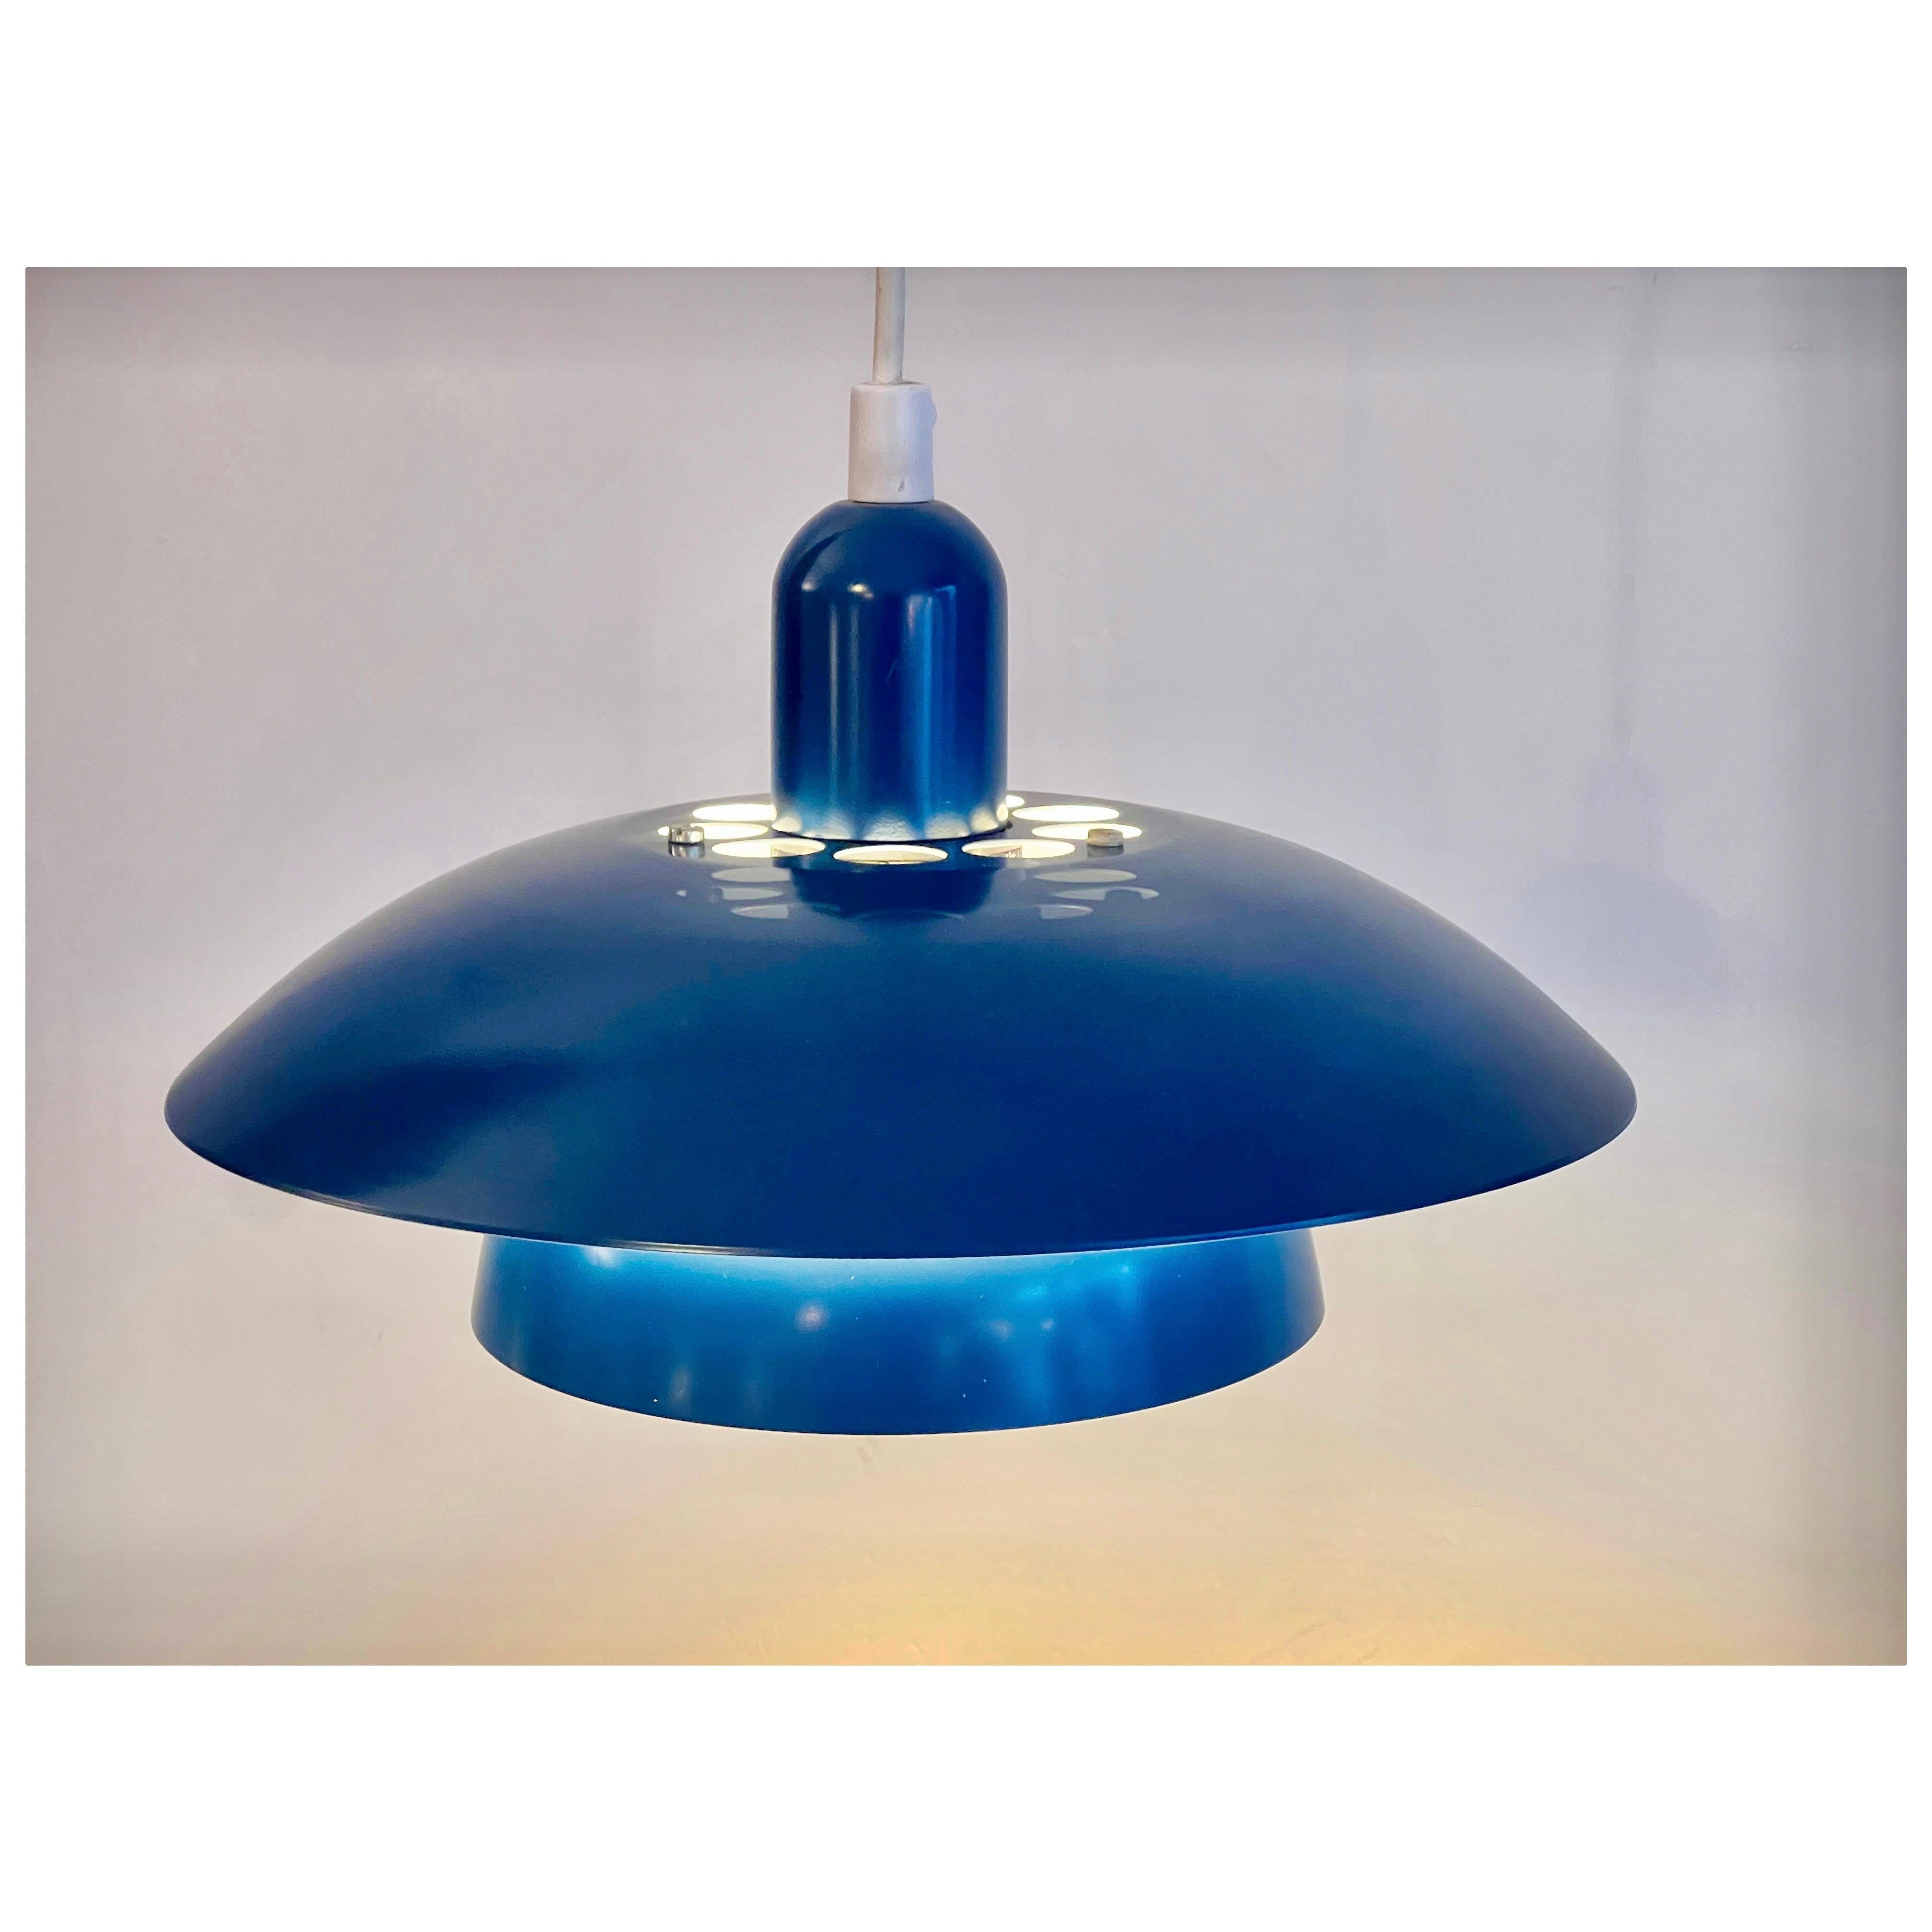 Small Scandinavian pendant lamp in an electric blue!  
The different layers and the circular holes on the top provide a nice play of light and shadow, also on the adjacent walls and ceiling!  
Blue outside, white inside  Smaller format, very